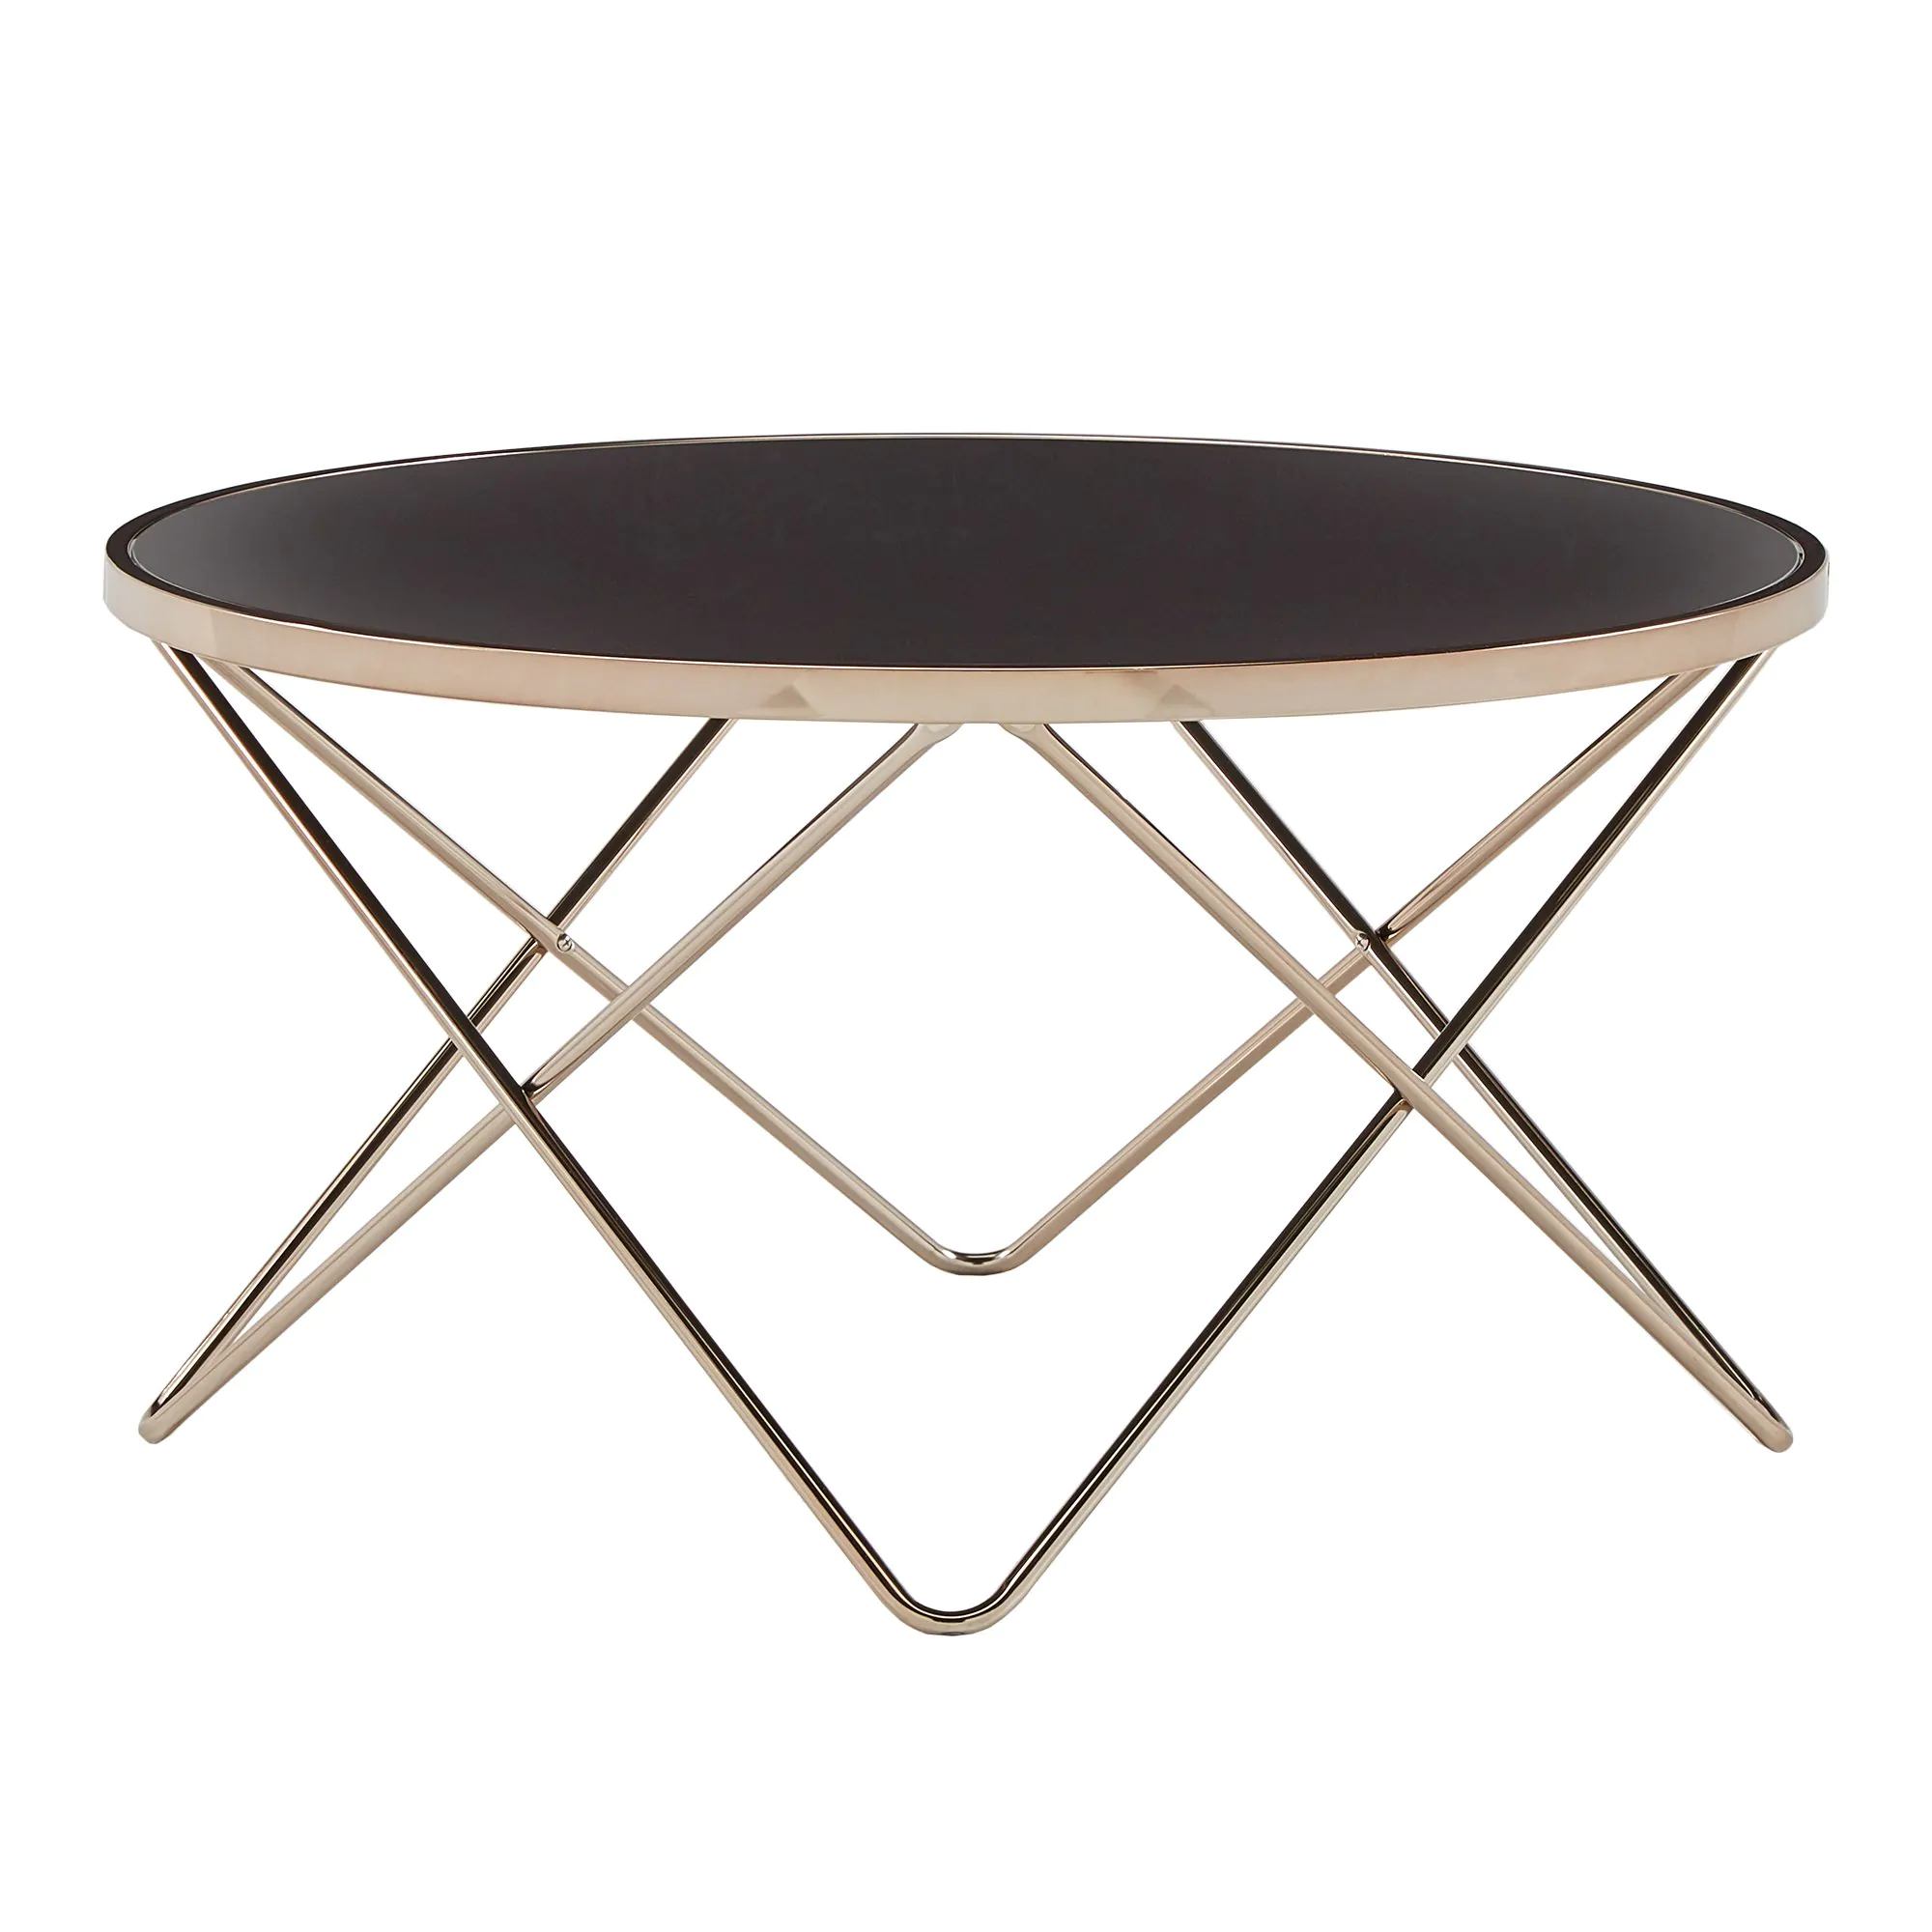 gabe champagne gold finish hairpin leg accent tables with black glass top inspire bold room essentials table free shipping today knotty pine bookcase marble brass side metal